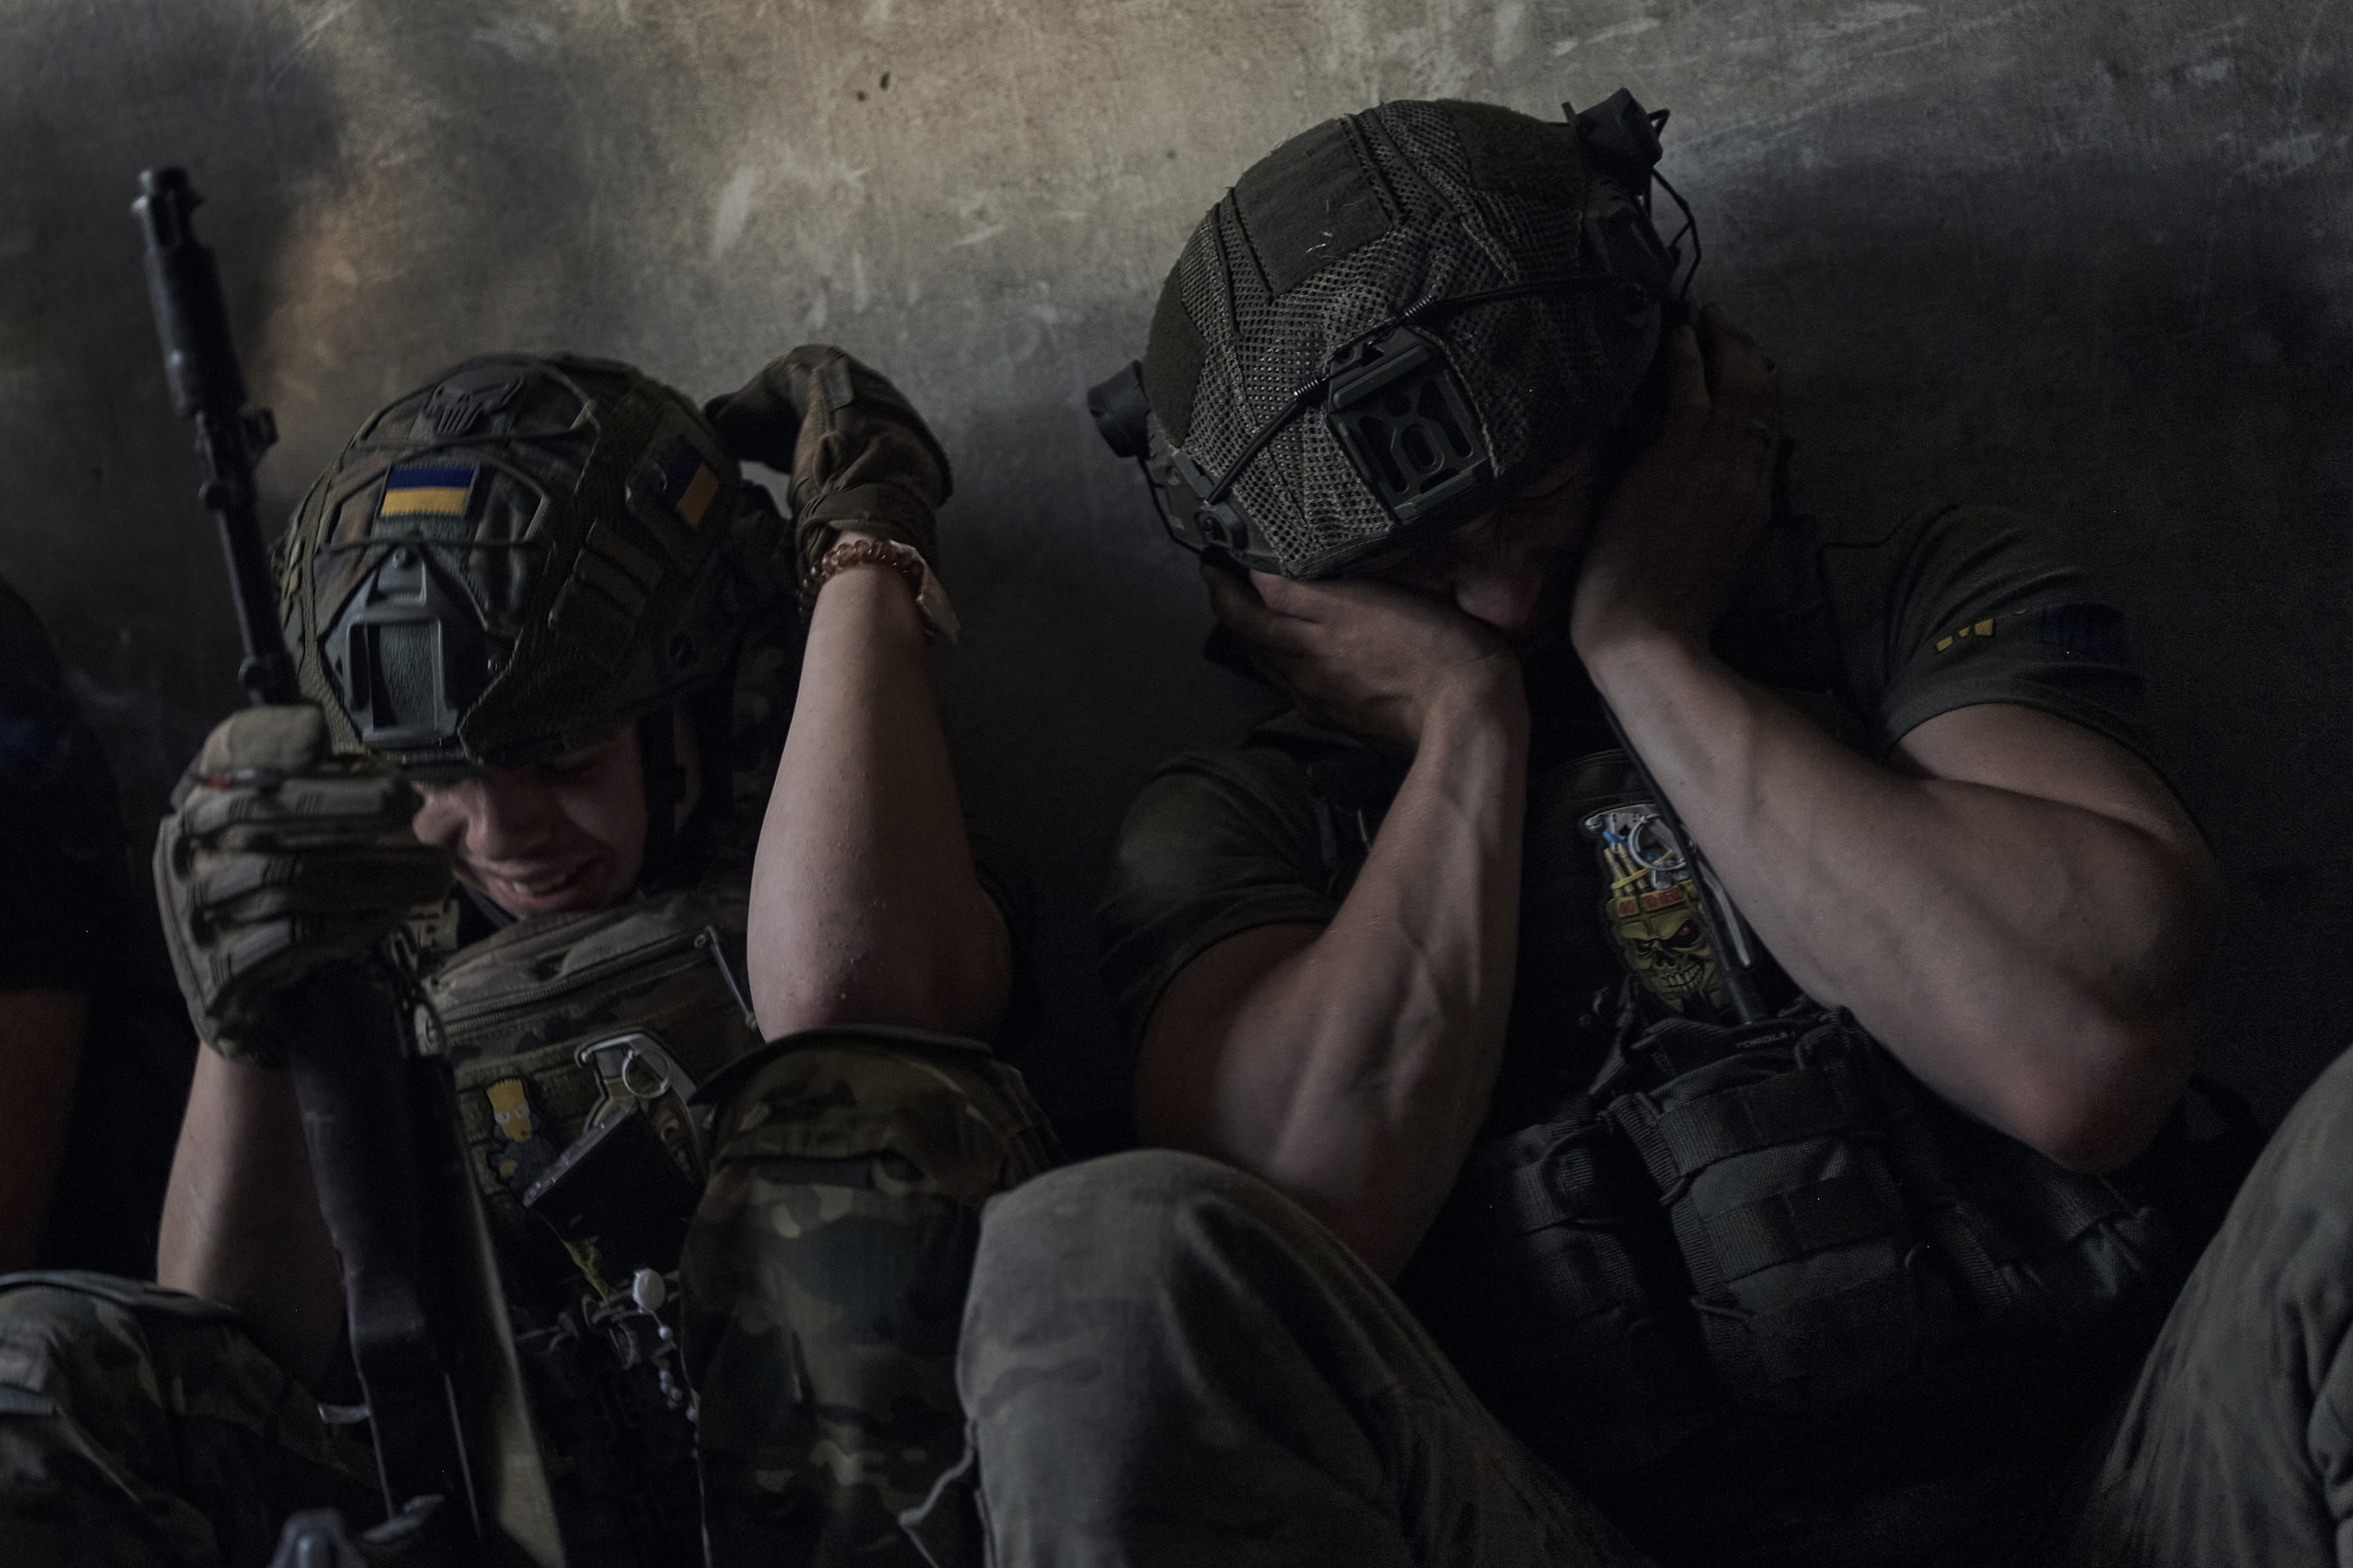 Ukrainian soldiers cover their ears to protect from the Russian tank shelling in a shelter on the frontline in the Zaporizhzhia region, Ukraine, on July 2, 2023. (AP Photo/Libkos)

Associated Press/LaPresse
Only Italy and Spain